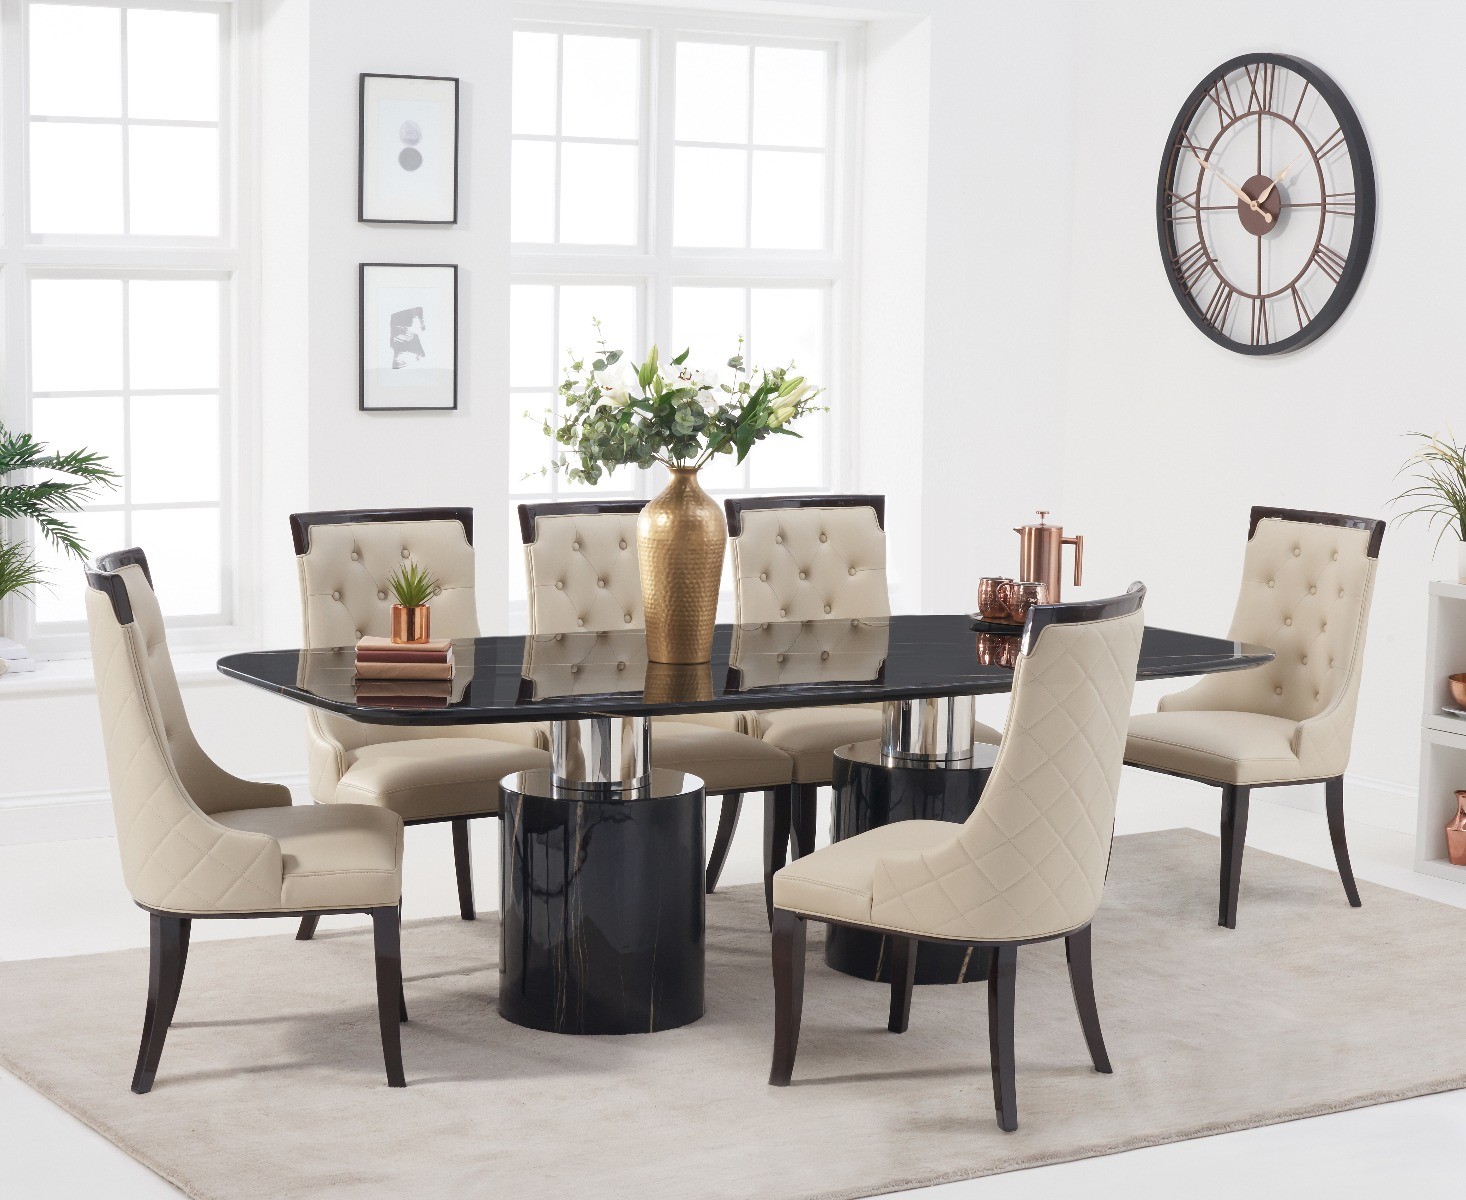 Antonio 180cm Black Marble Dining Table With 6 Cream Francesca Chairs